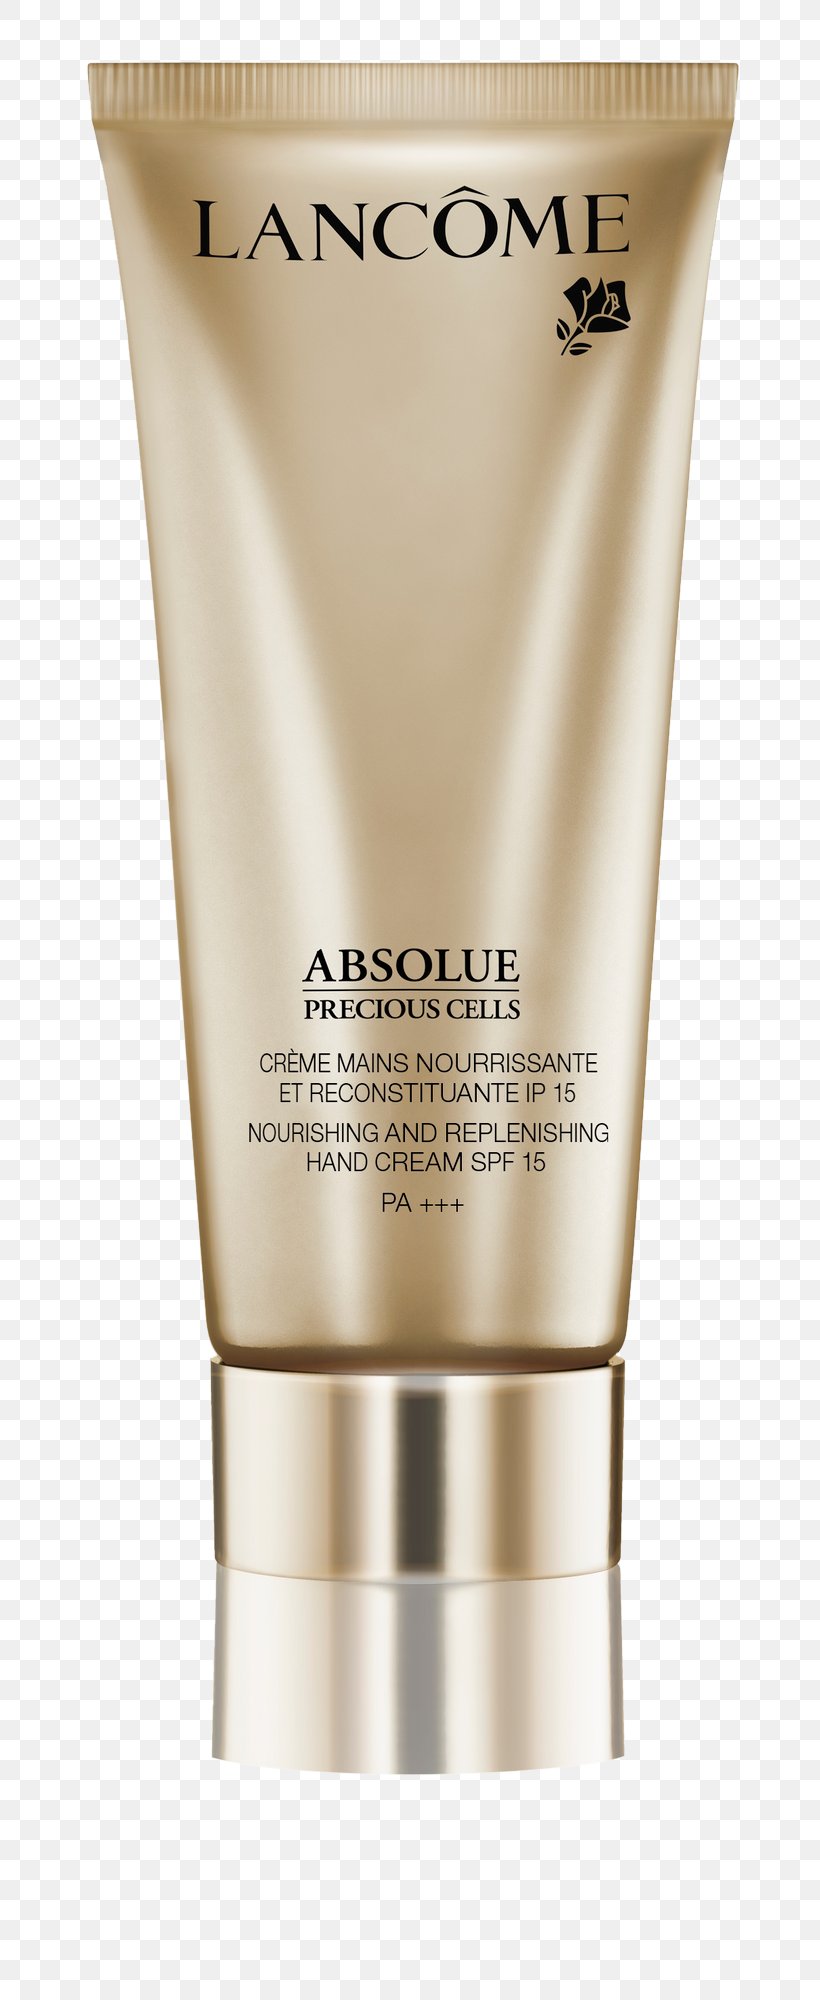 Lancôme Absolue Precious Cells Day Cream Lotion Lancôme Absolue Precious Cells Day Cream Skin, PNG, 746x2000px, Cream, Balsam, Biotherm, Cosmetics, Lotion Download Free